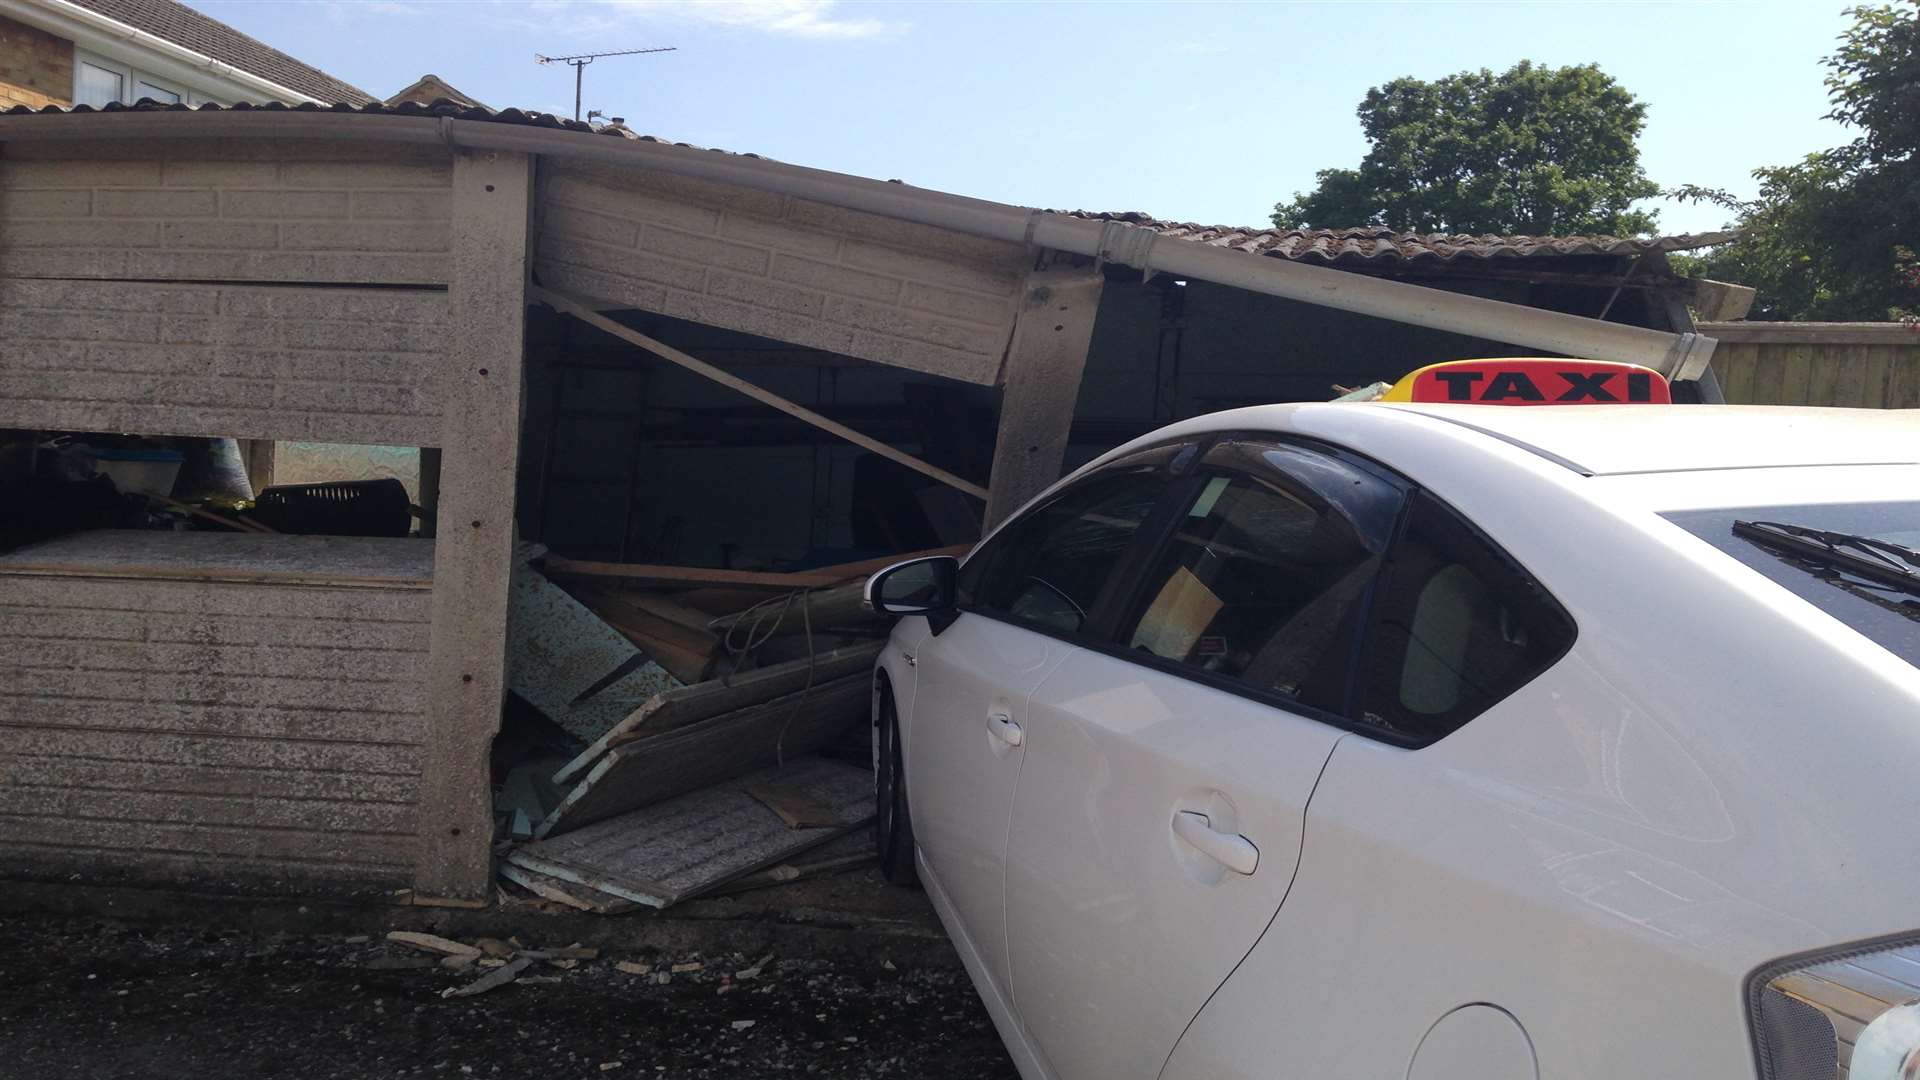 The taxi which crashed into the garage in Sussex Drive, in Chatham